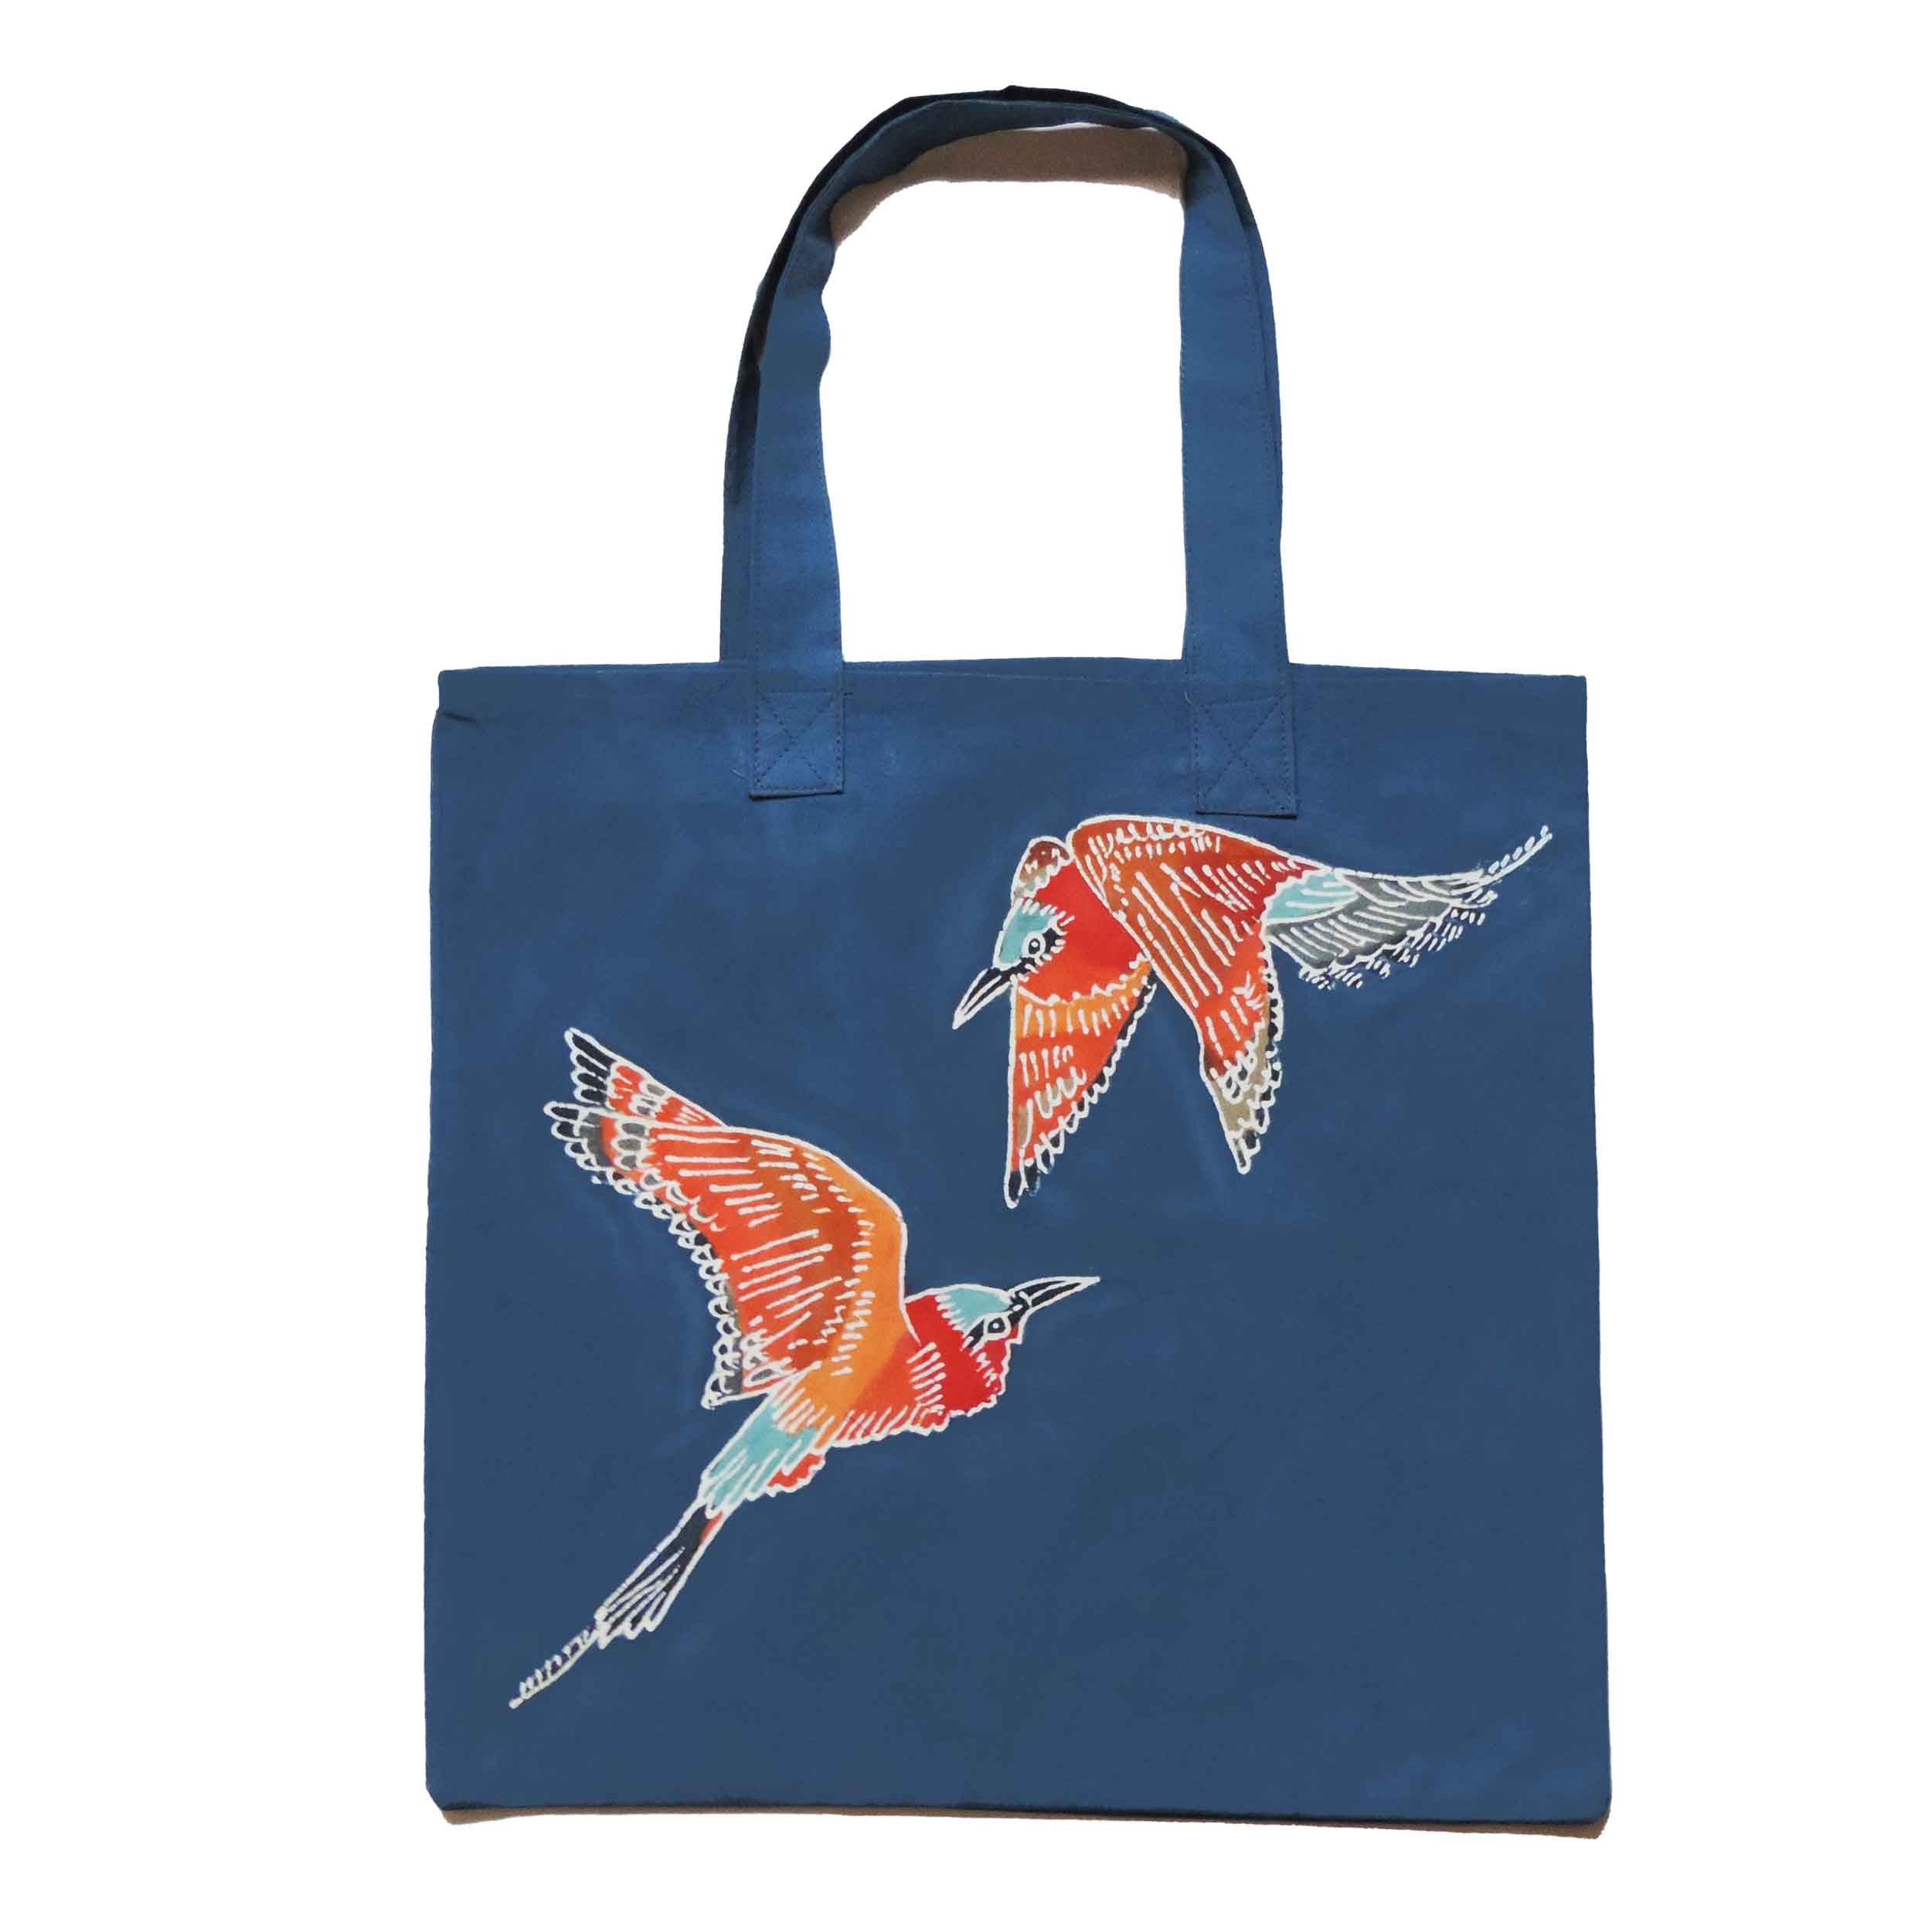 Papiko Carmine Bee Eater Tote Bag - Handmade by TRIBAL TEXTILES - Handcrafted Home Decor Interiors - African Made